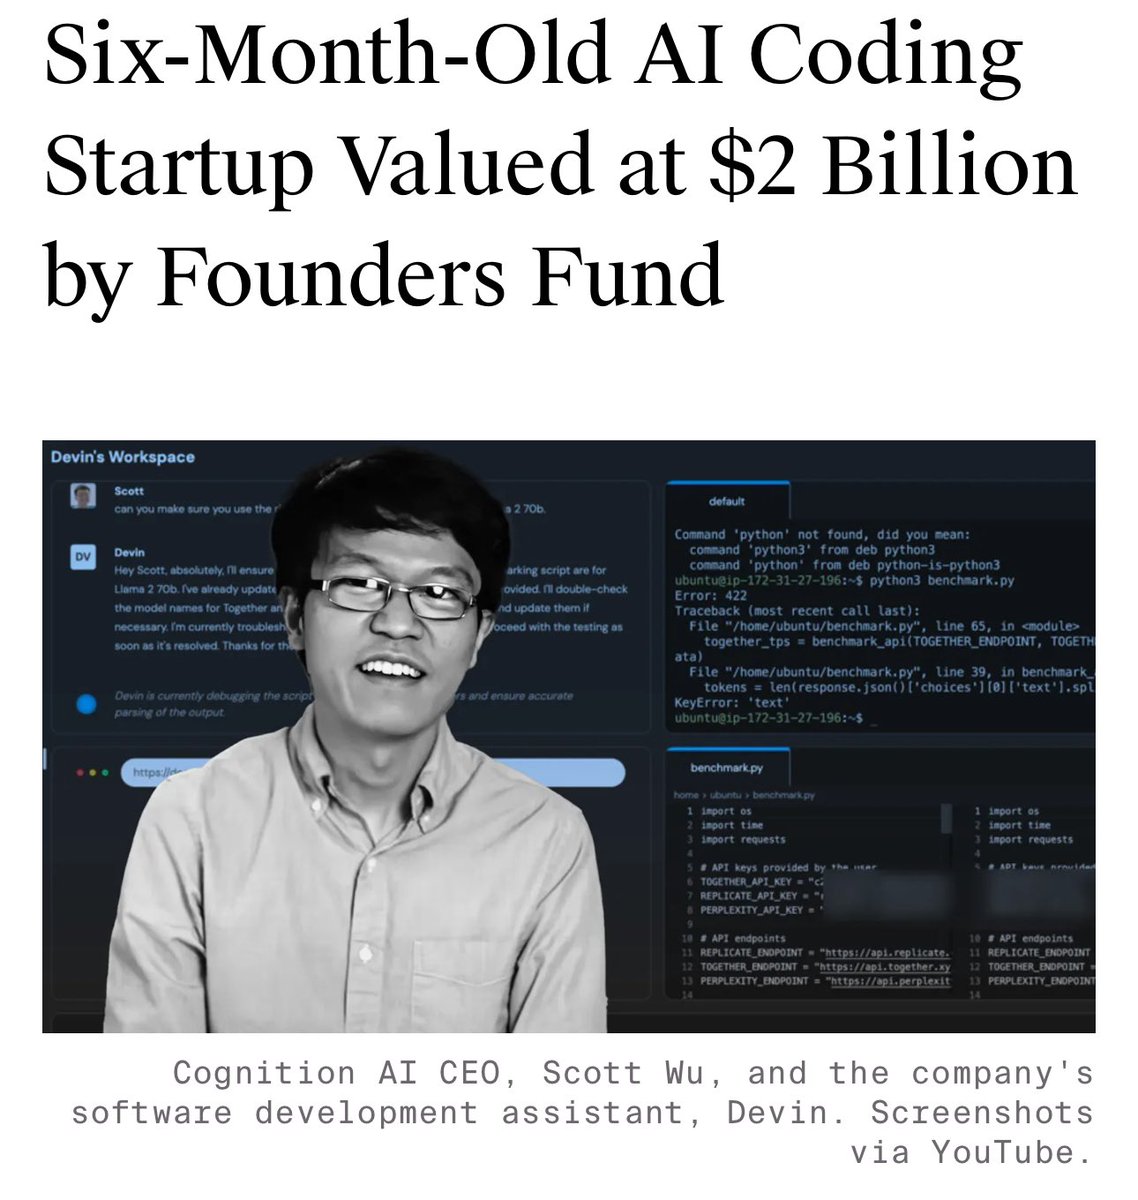 Cognition Labs (creator of Devin) is now valued at a $2B

The startup is 6 months old and has no revenue

AI agents are so back